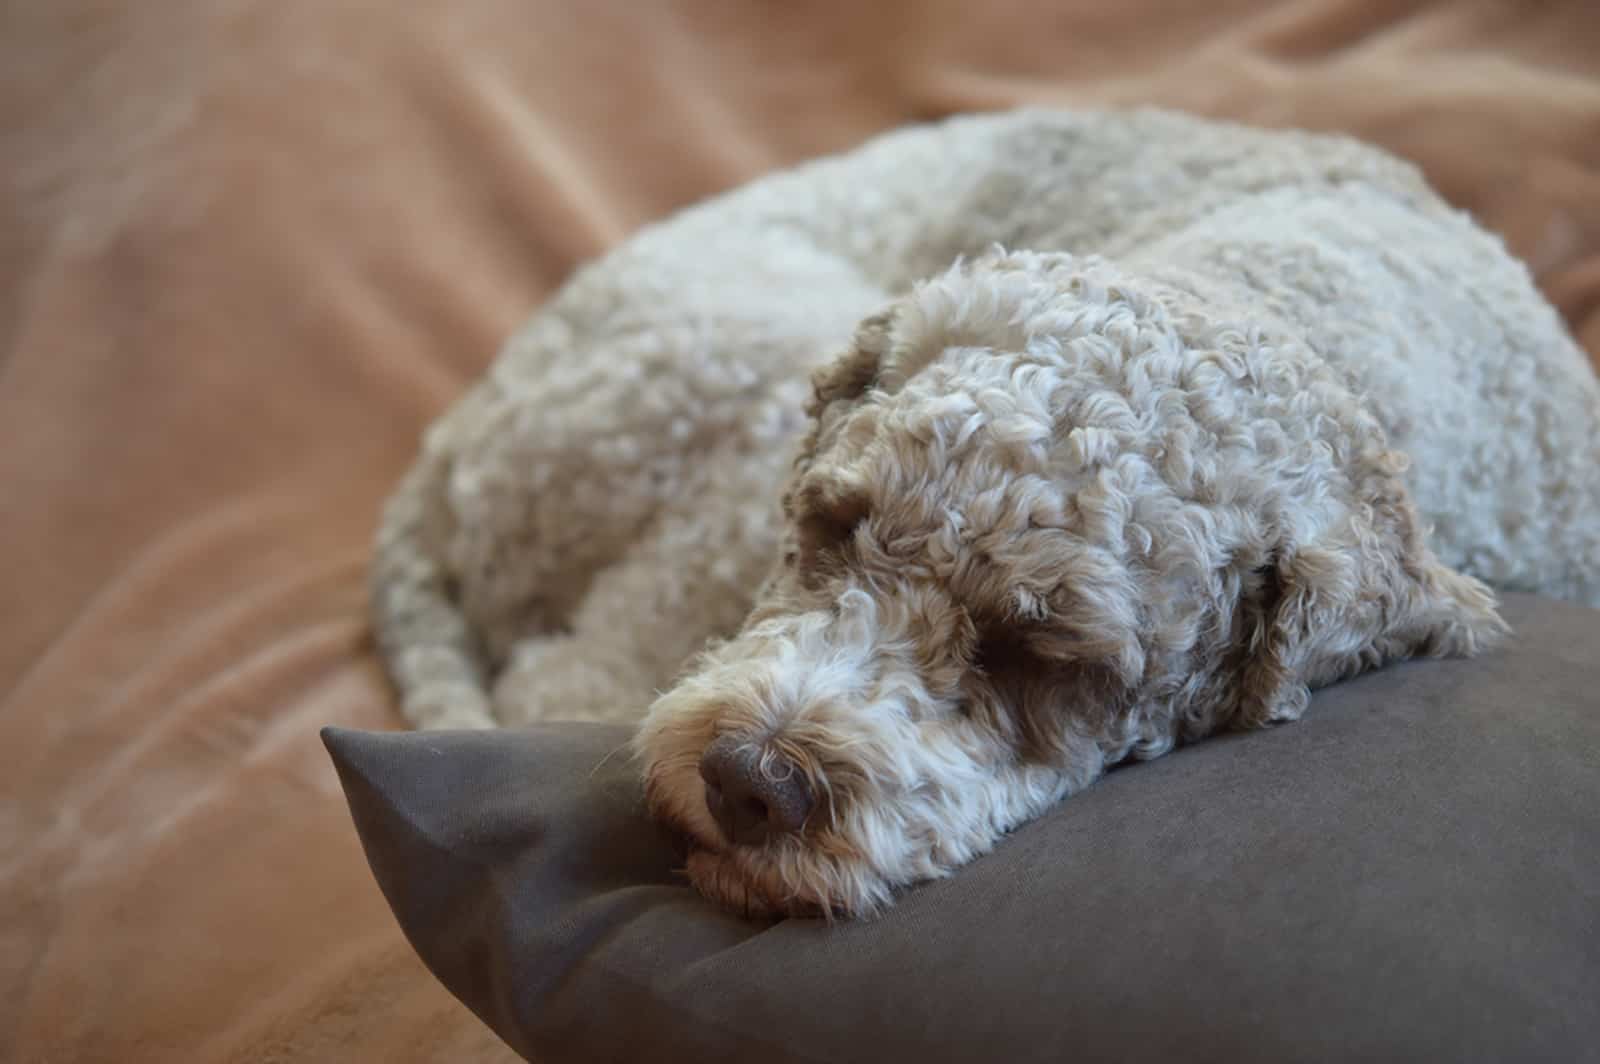 lagotto romagnolo lying on the pillow